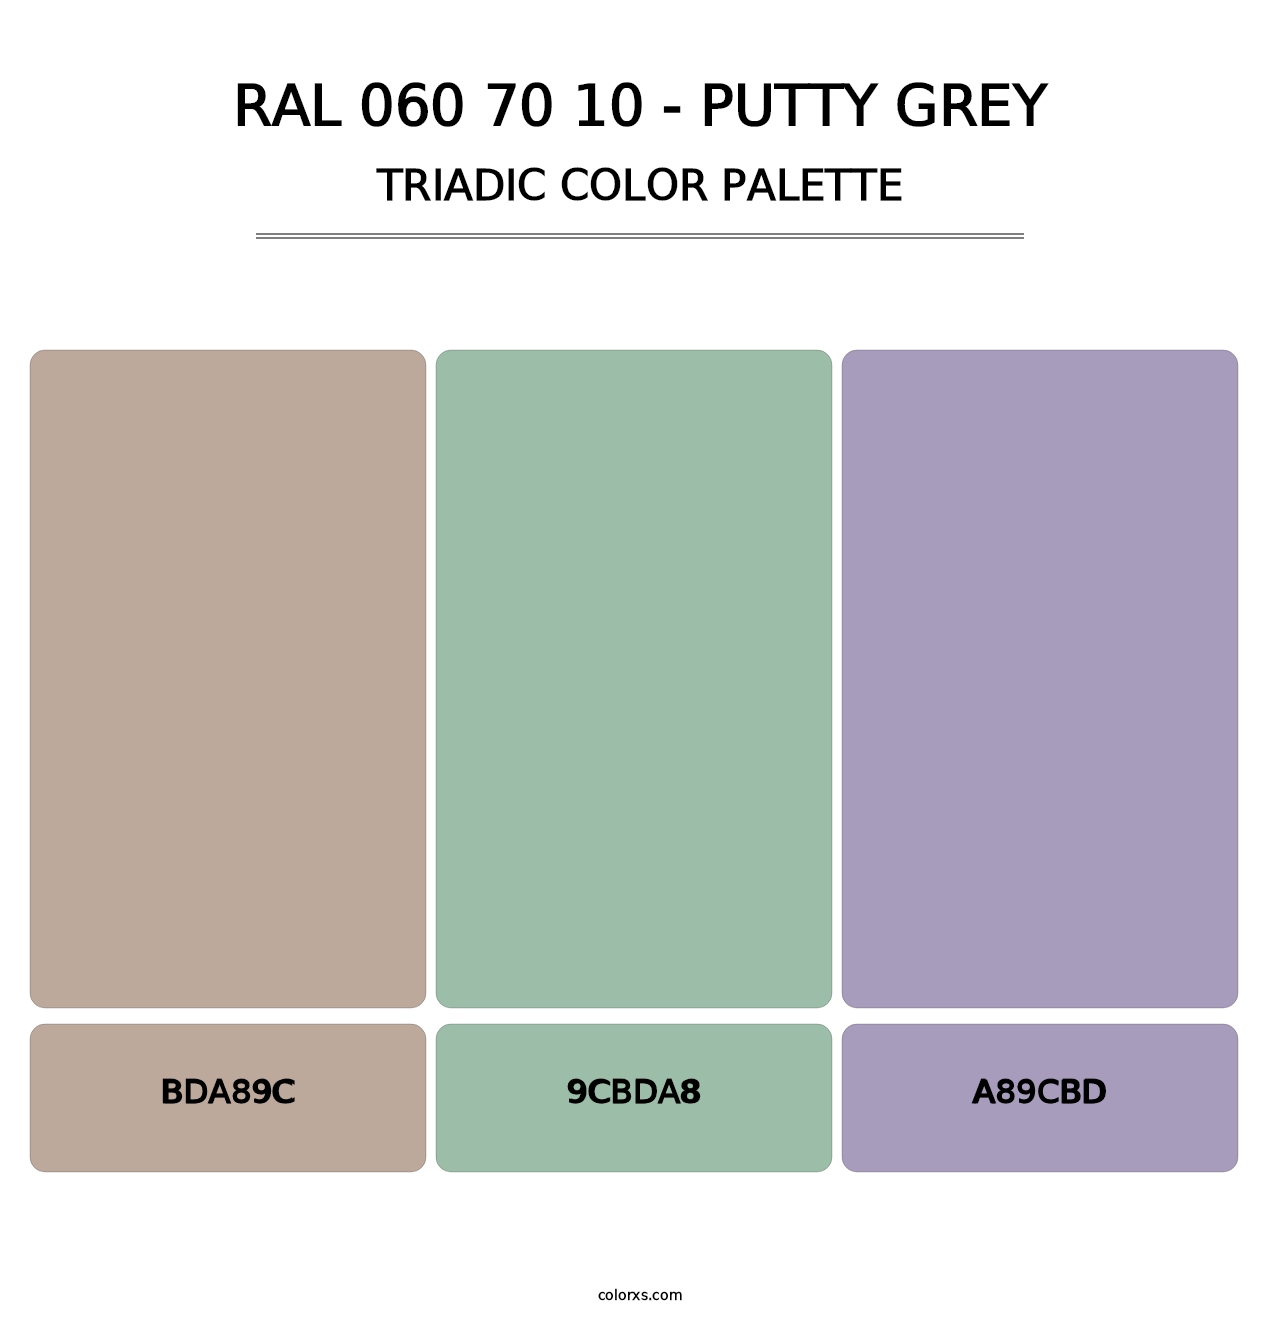 RAL 060 70 10 - Putty Grey - Triadic Color Palette